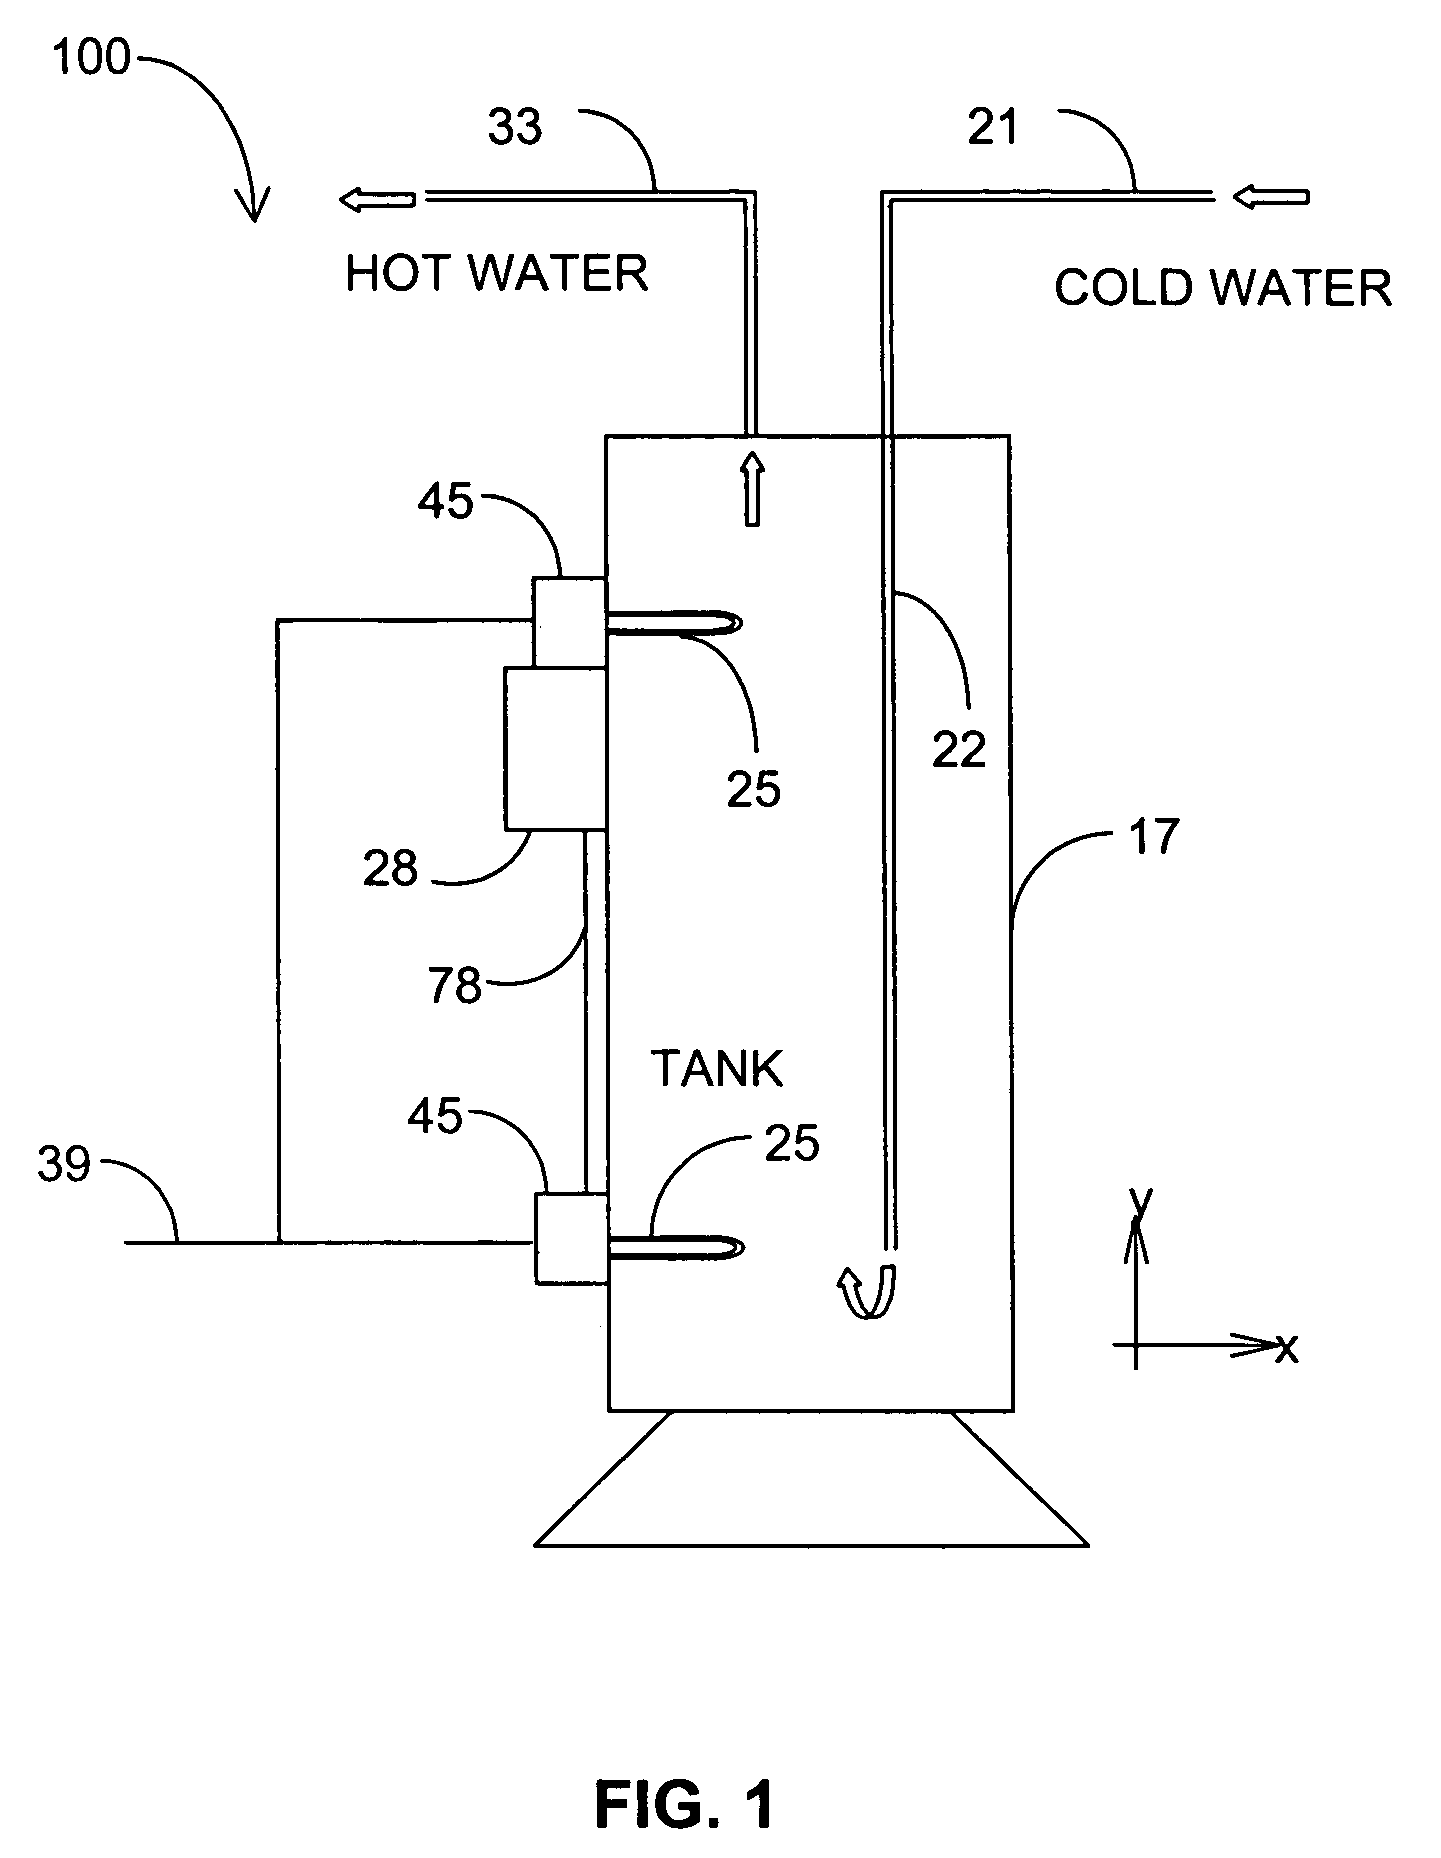 System and method for preventing overheating of water within a water heater tank